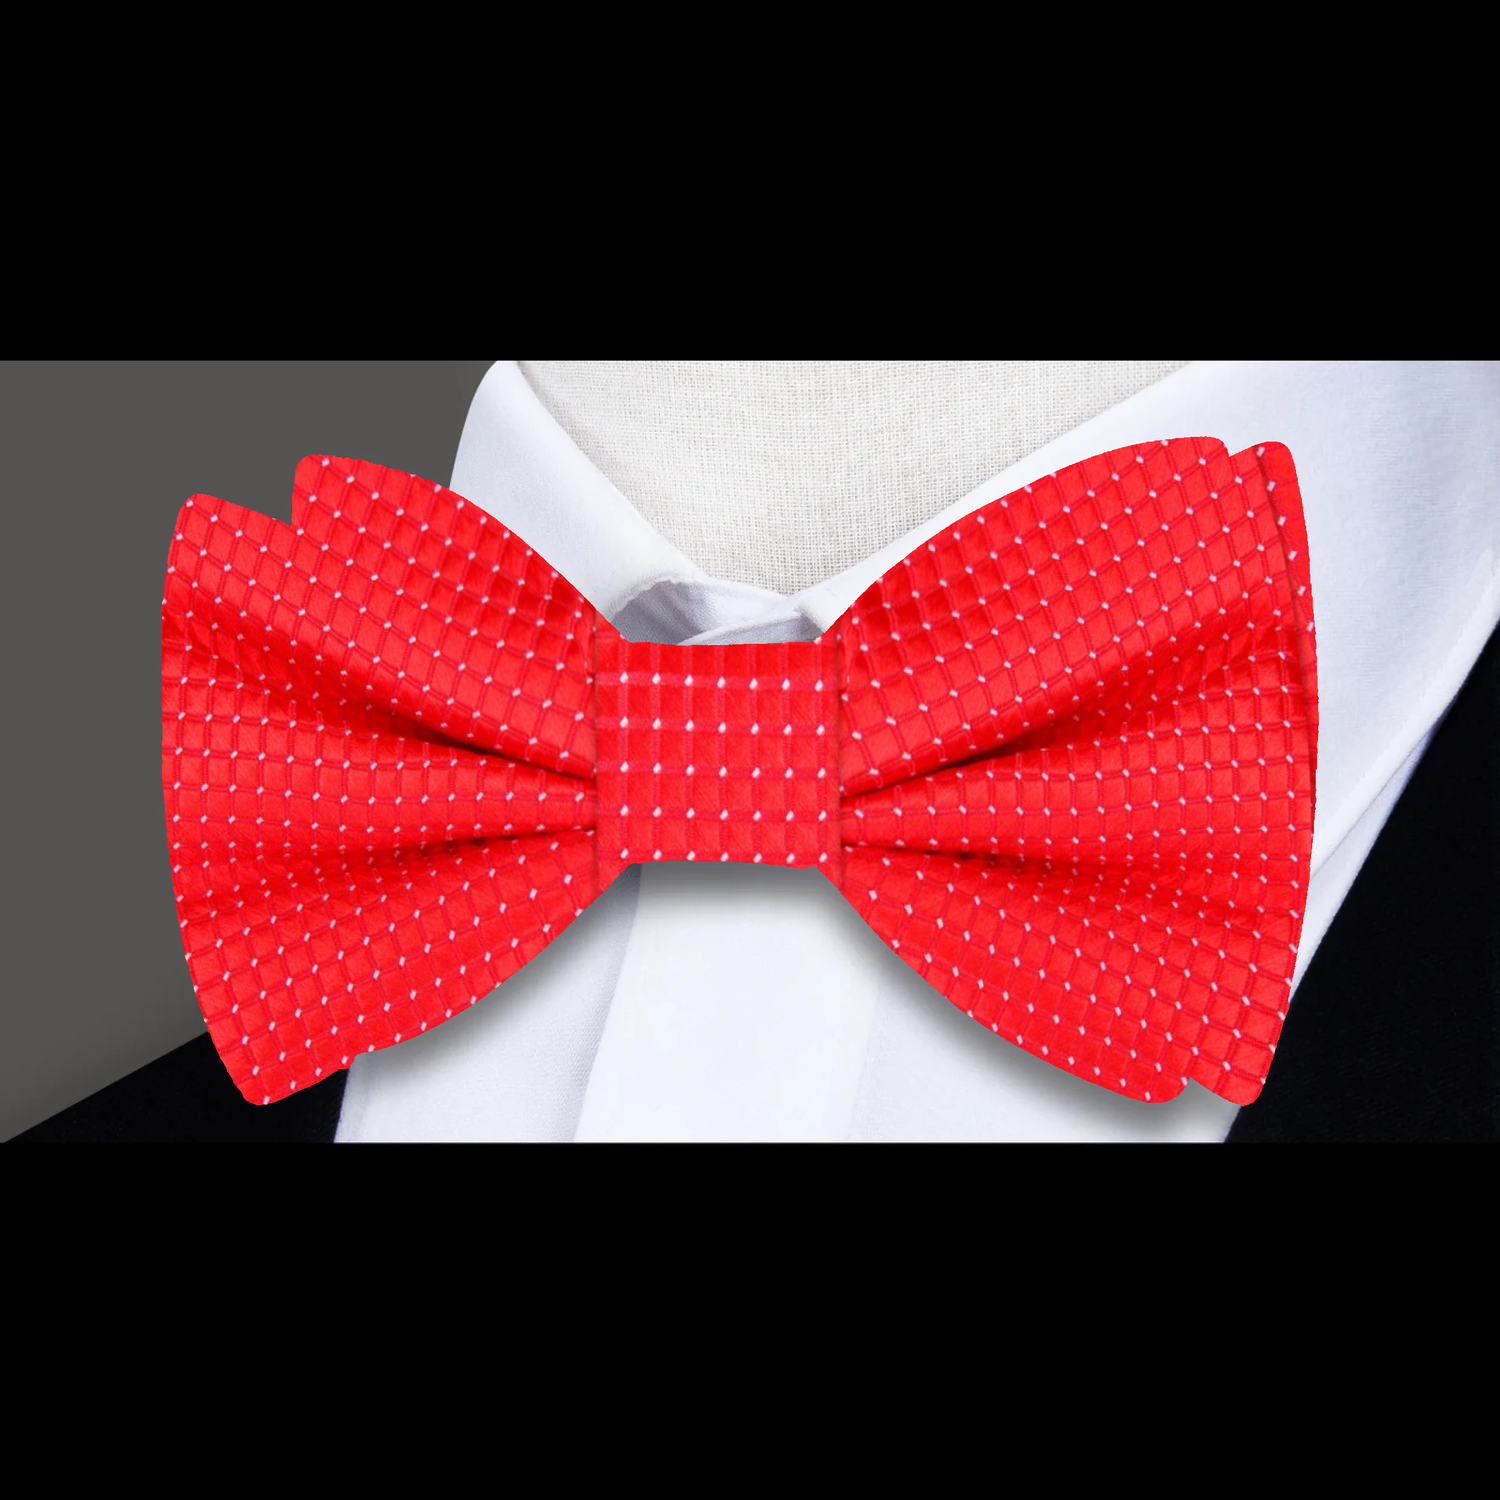 Red with White Geometric Texture Bow Tie